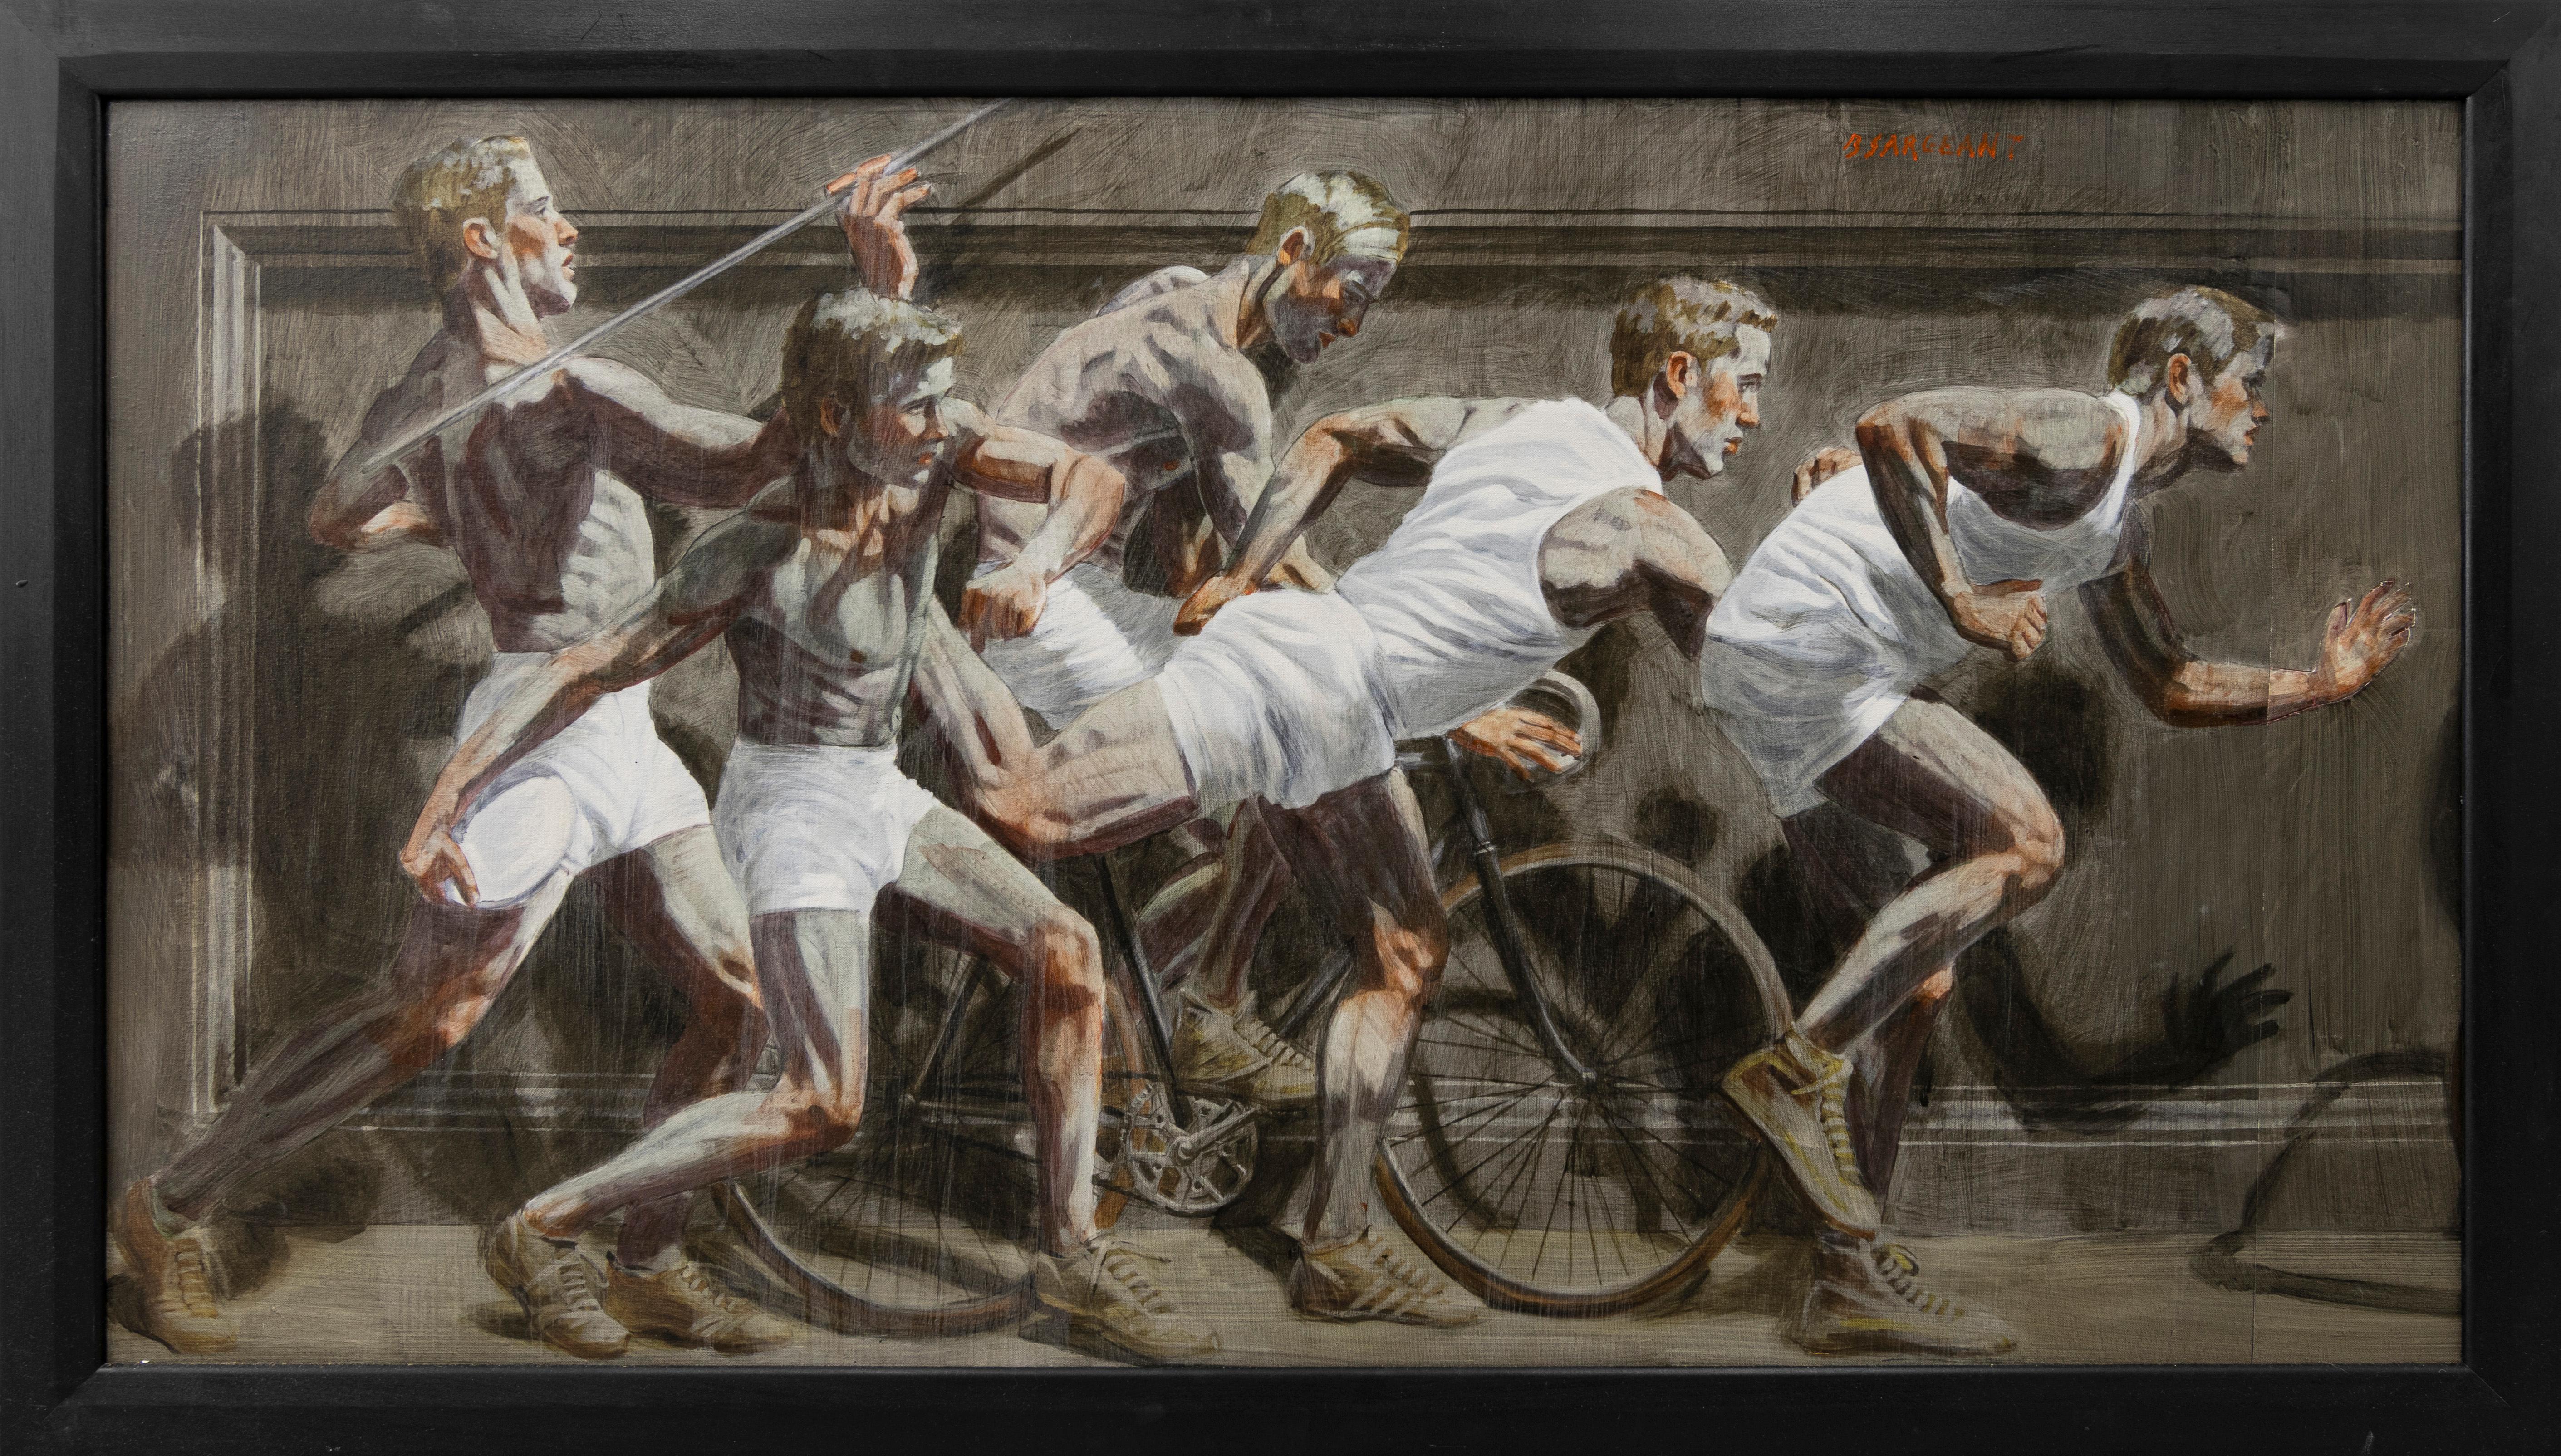 Mark Beard Figurative Painting - [Bruce Sargeant (1898-1938)] Frieze with Five Tightly Grouped Athletes